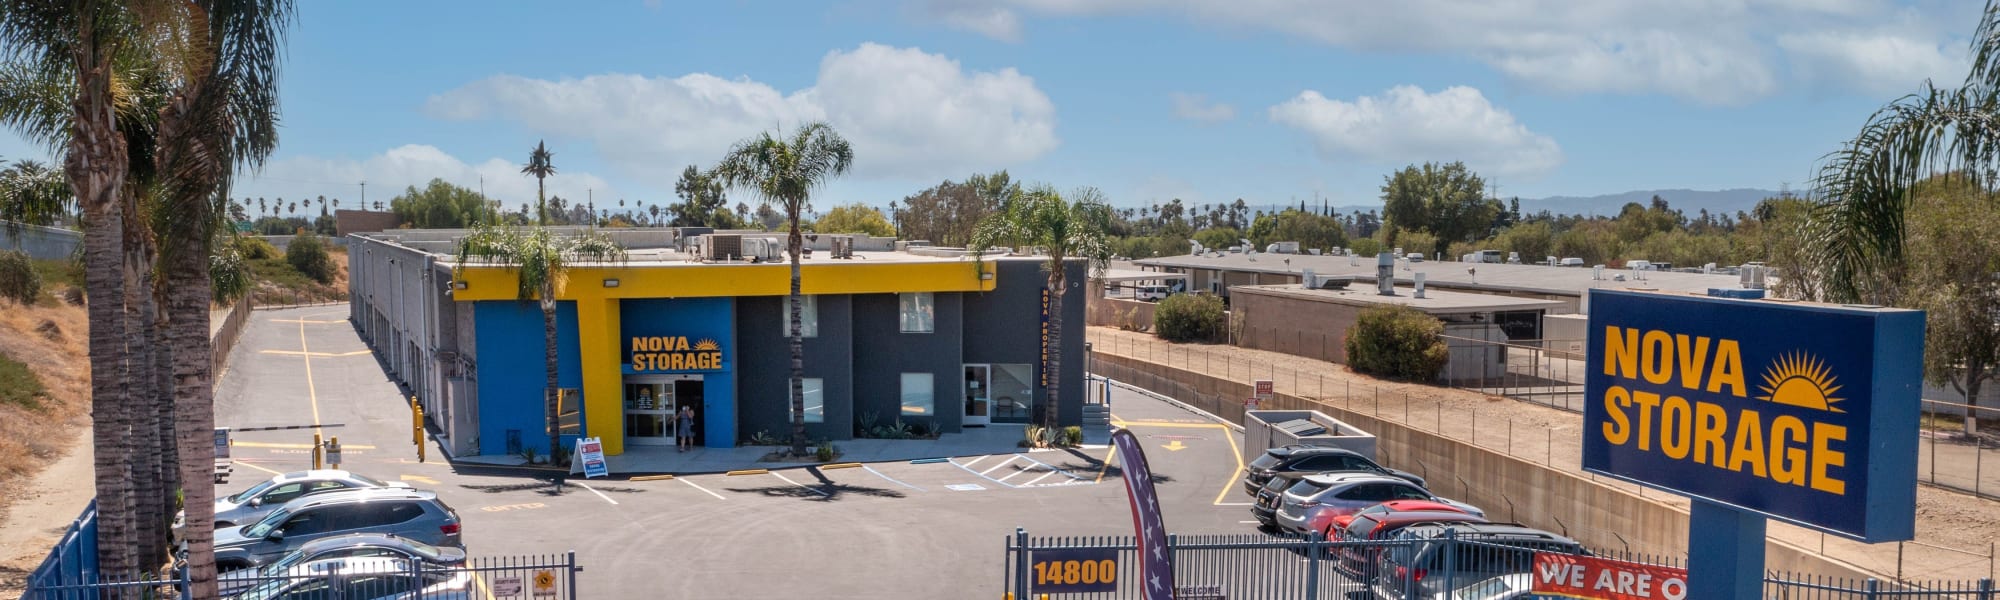 Find and rent a storage unit from Nova Storage in Mission Hills, California